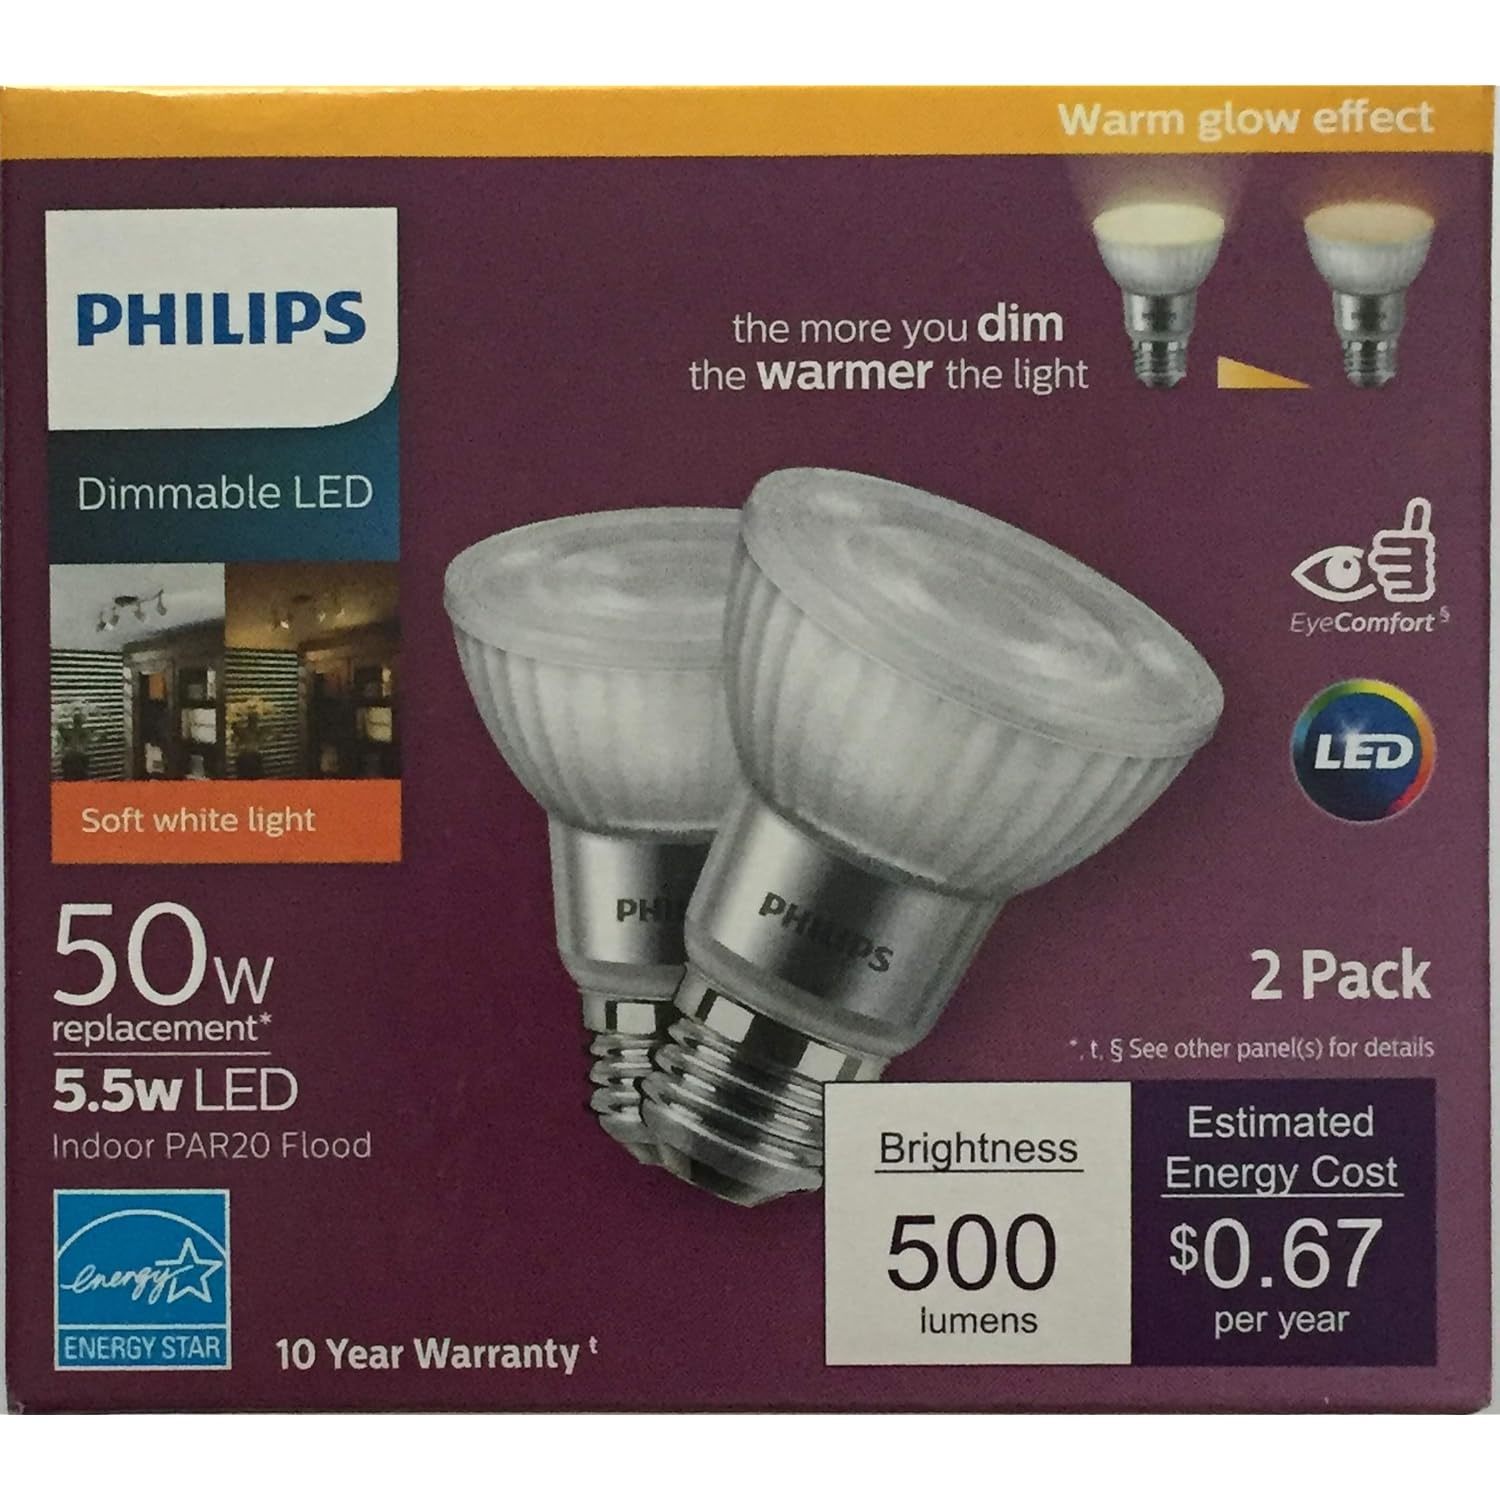 Philips LED Dimmable PAR20 40-Degree Indoor Flood Light Bulb with Warm Glow Effe - $32.29